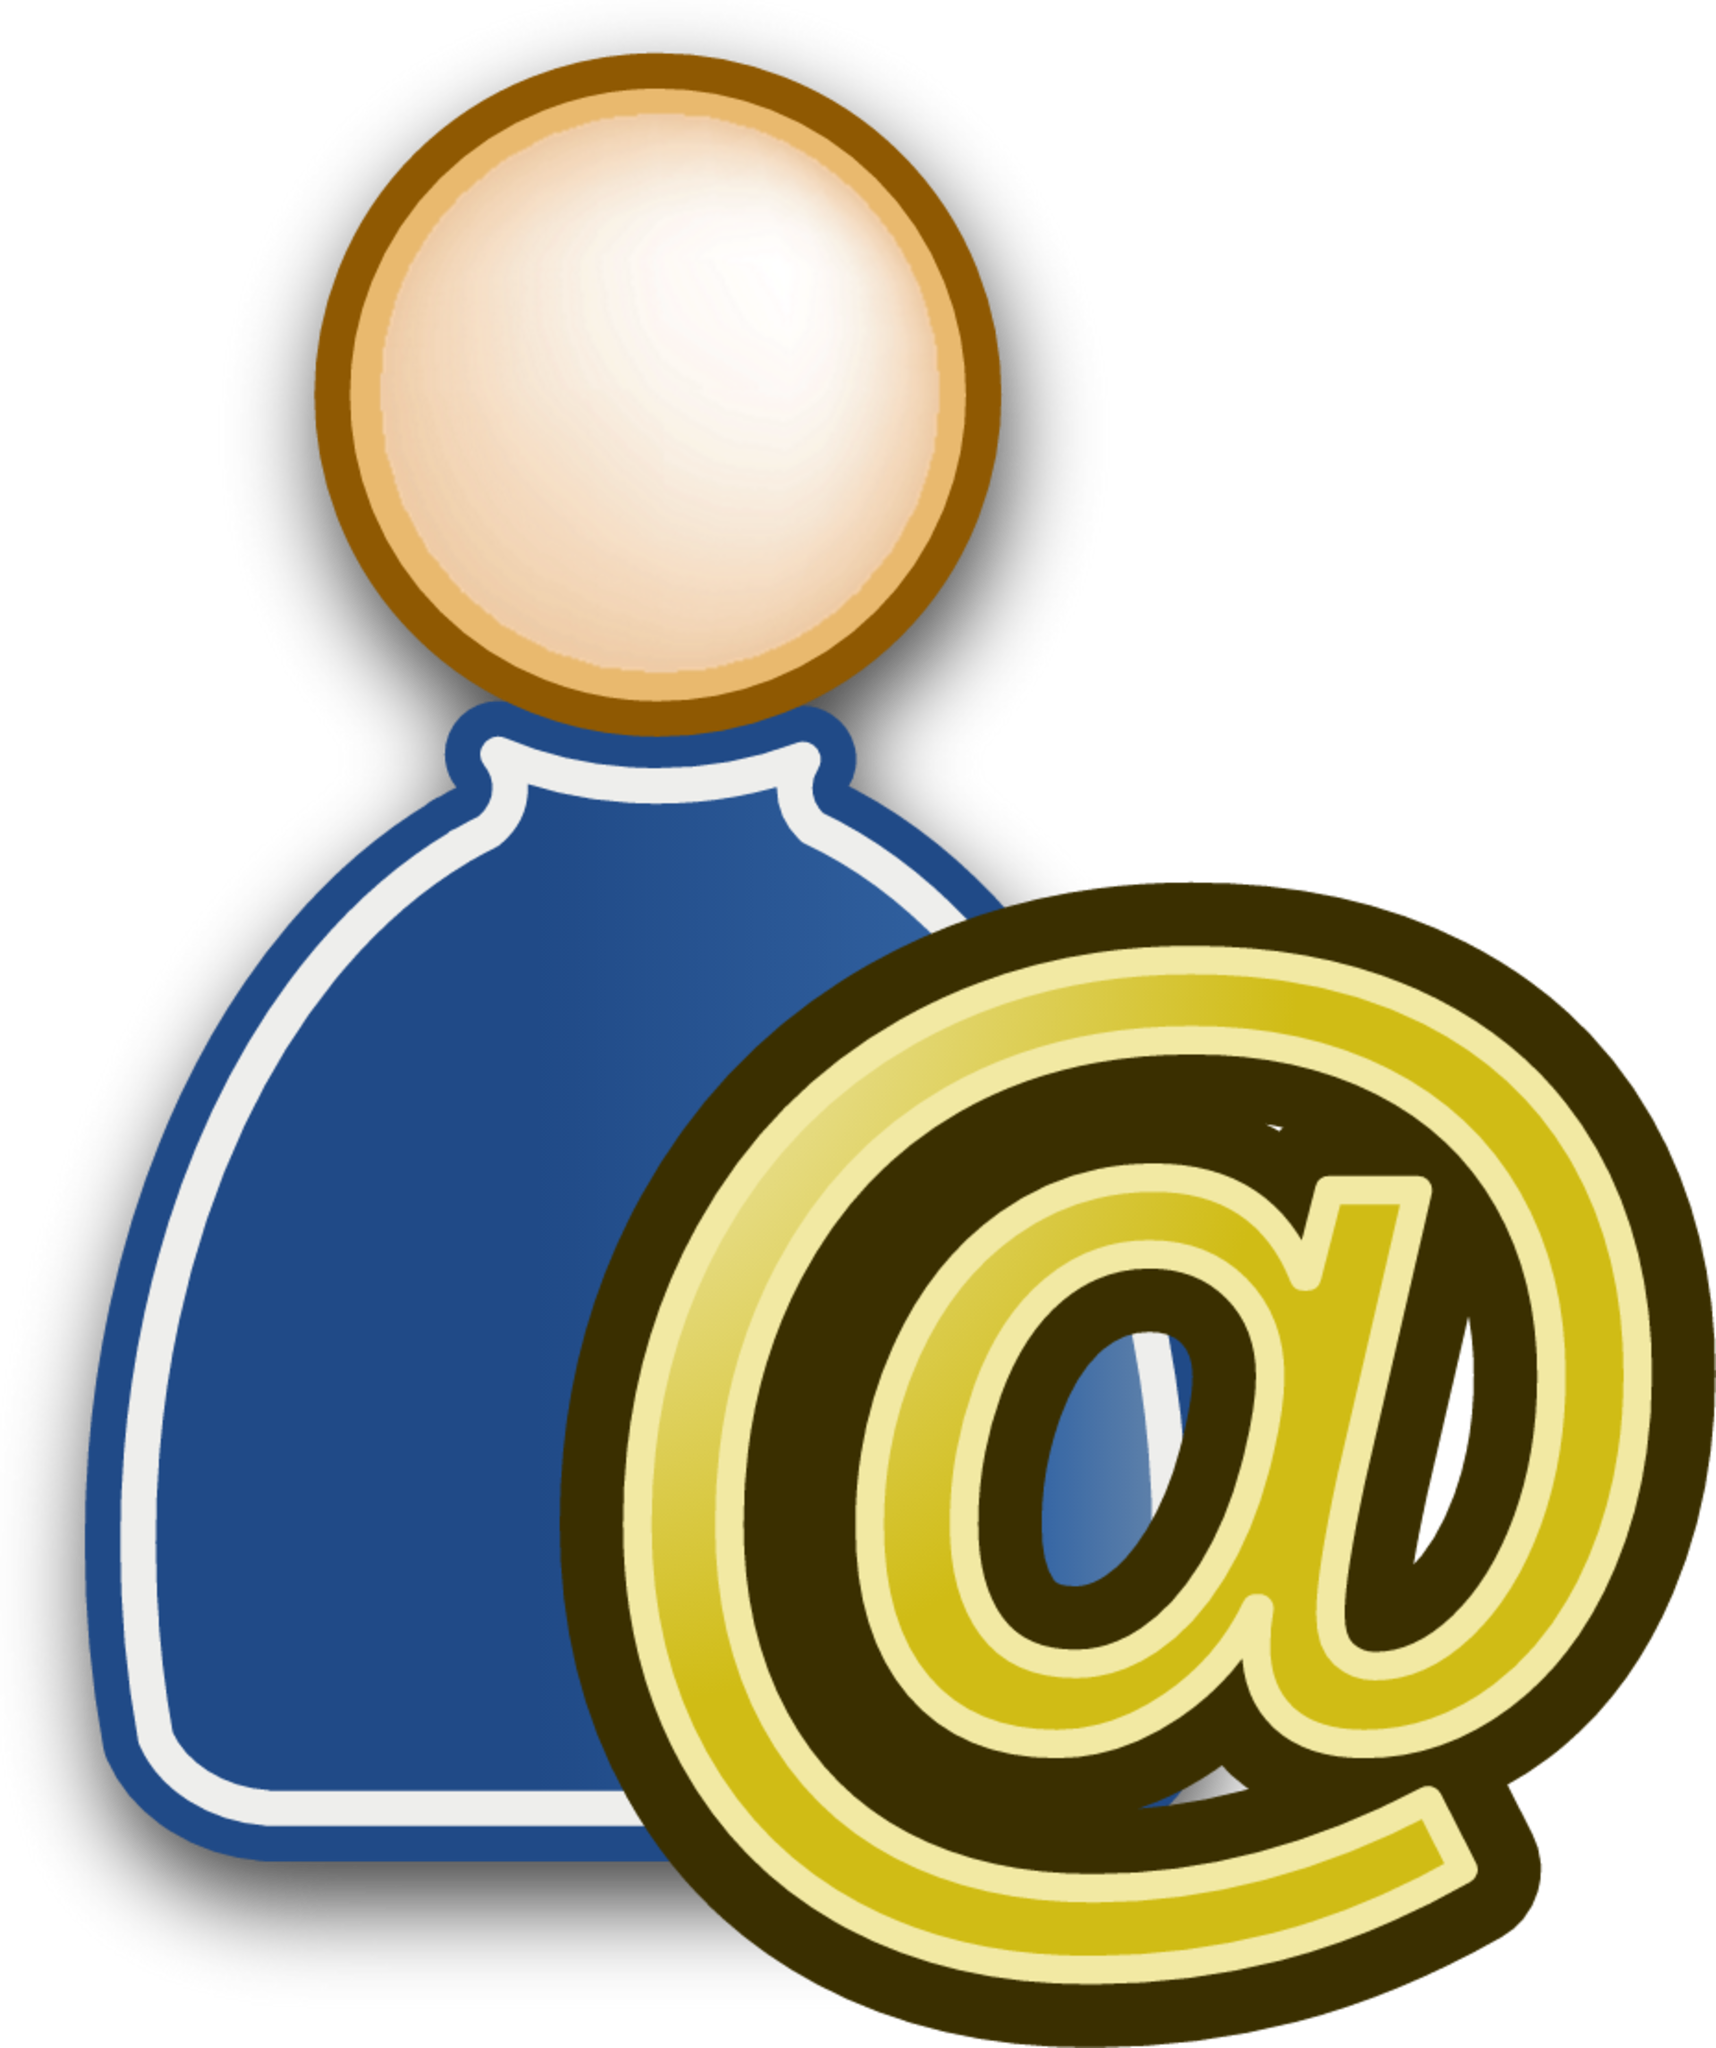 user contact icon